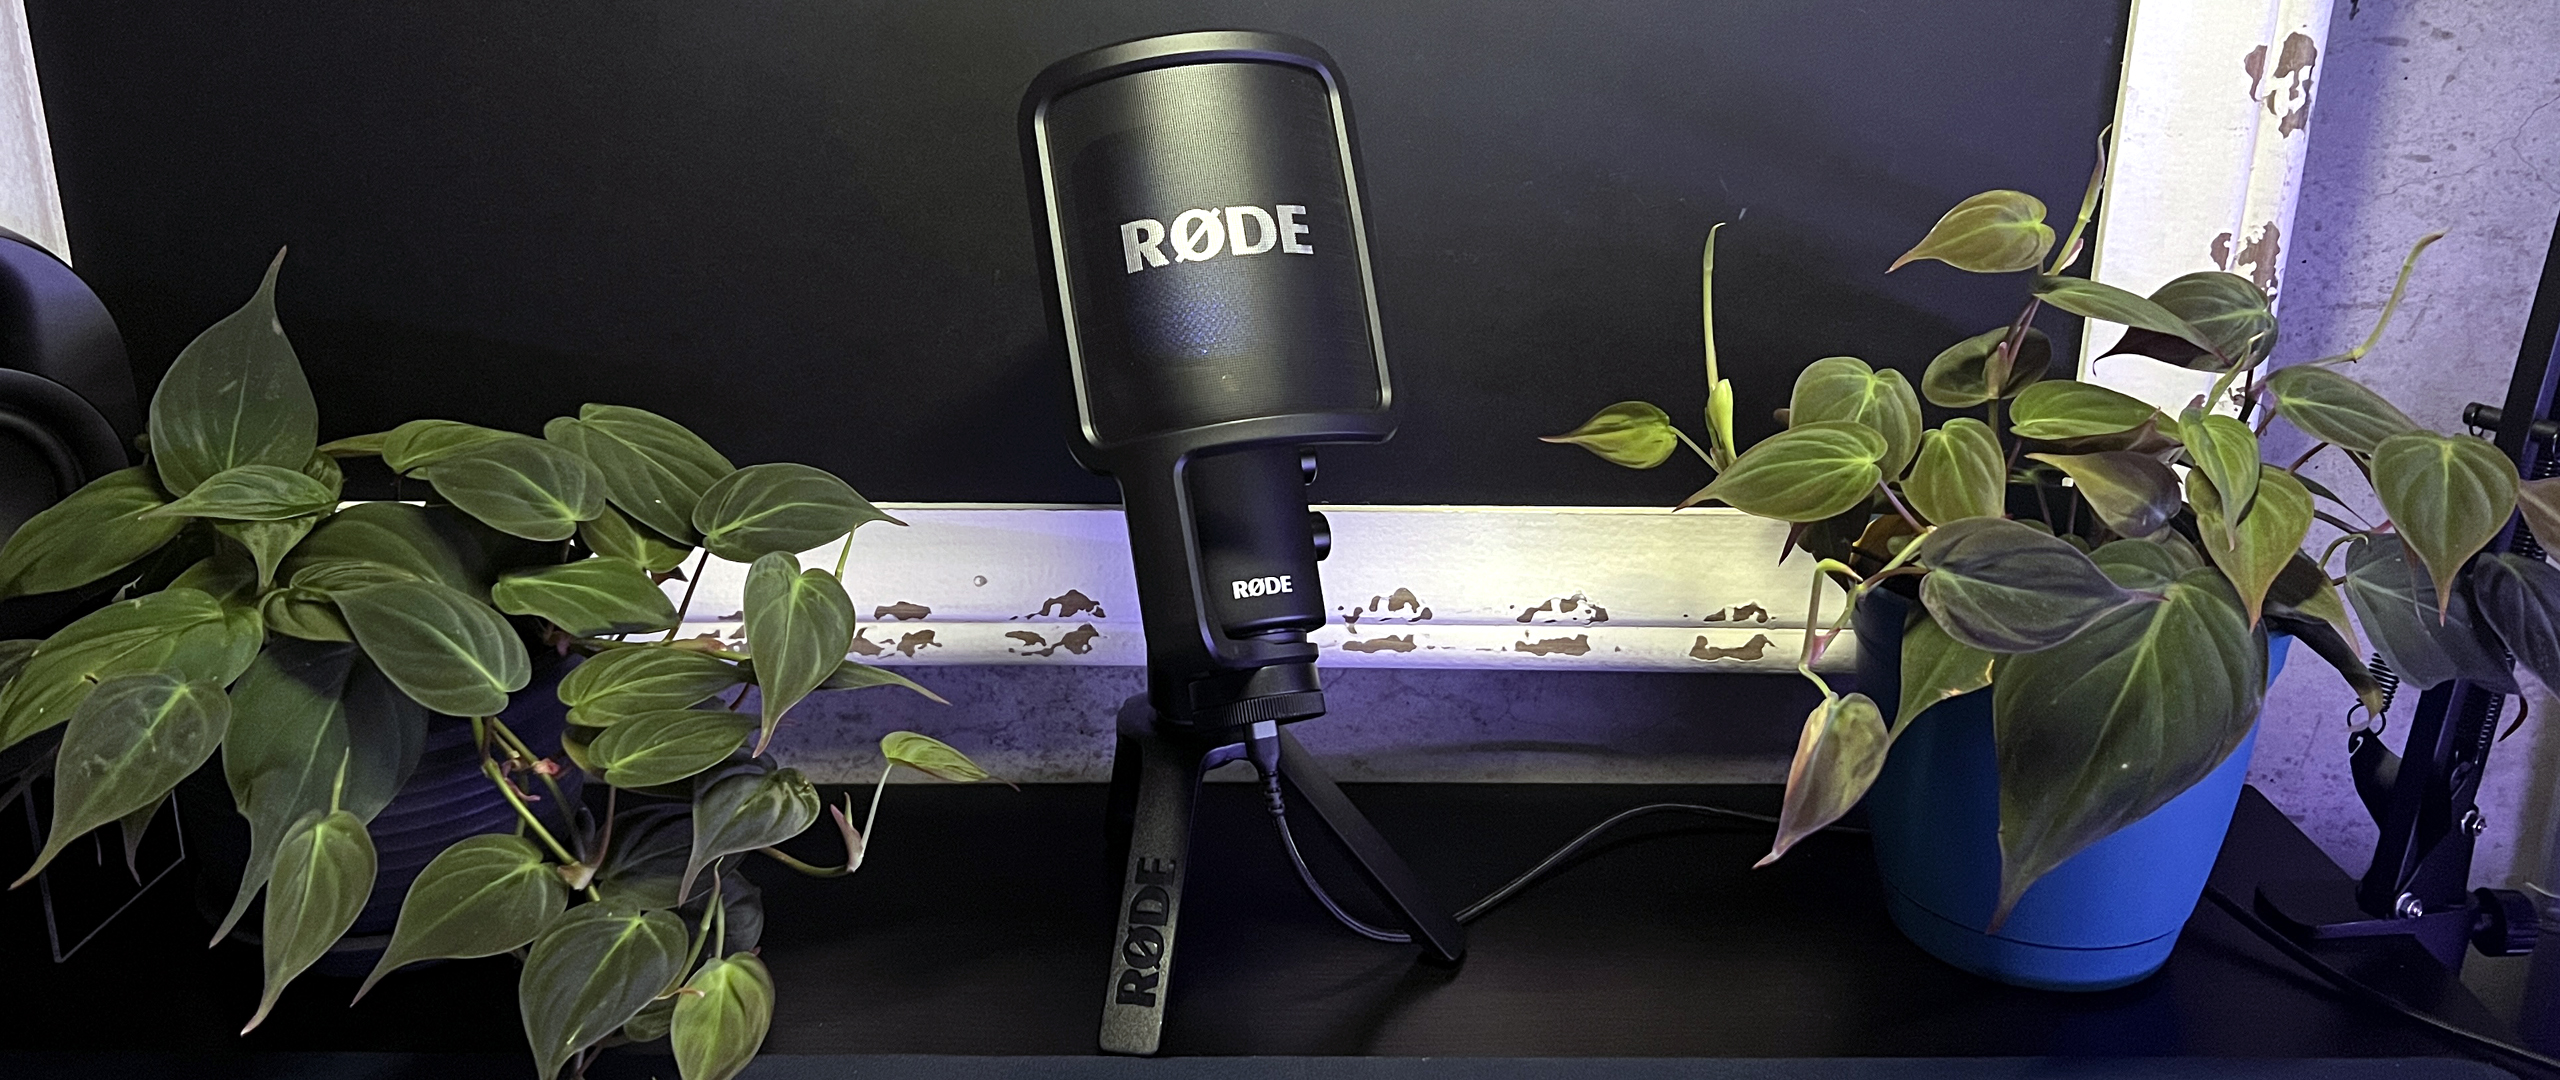 Røde Releases NT-USB+ Professional USB-C Microphone With Built-In DSP  Processing Features